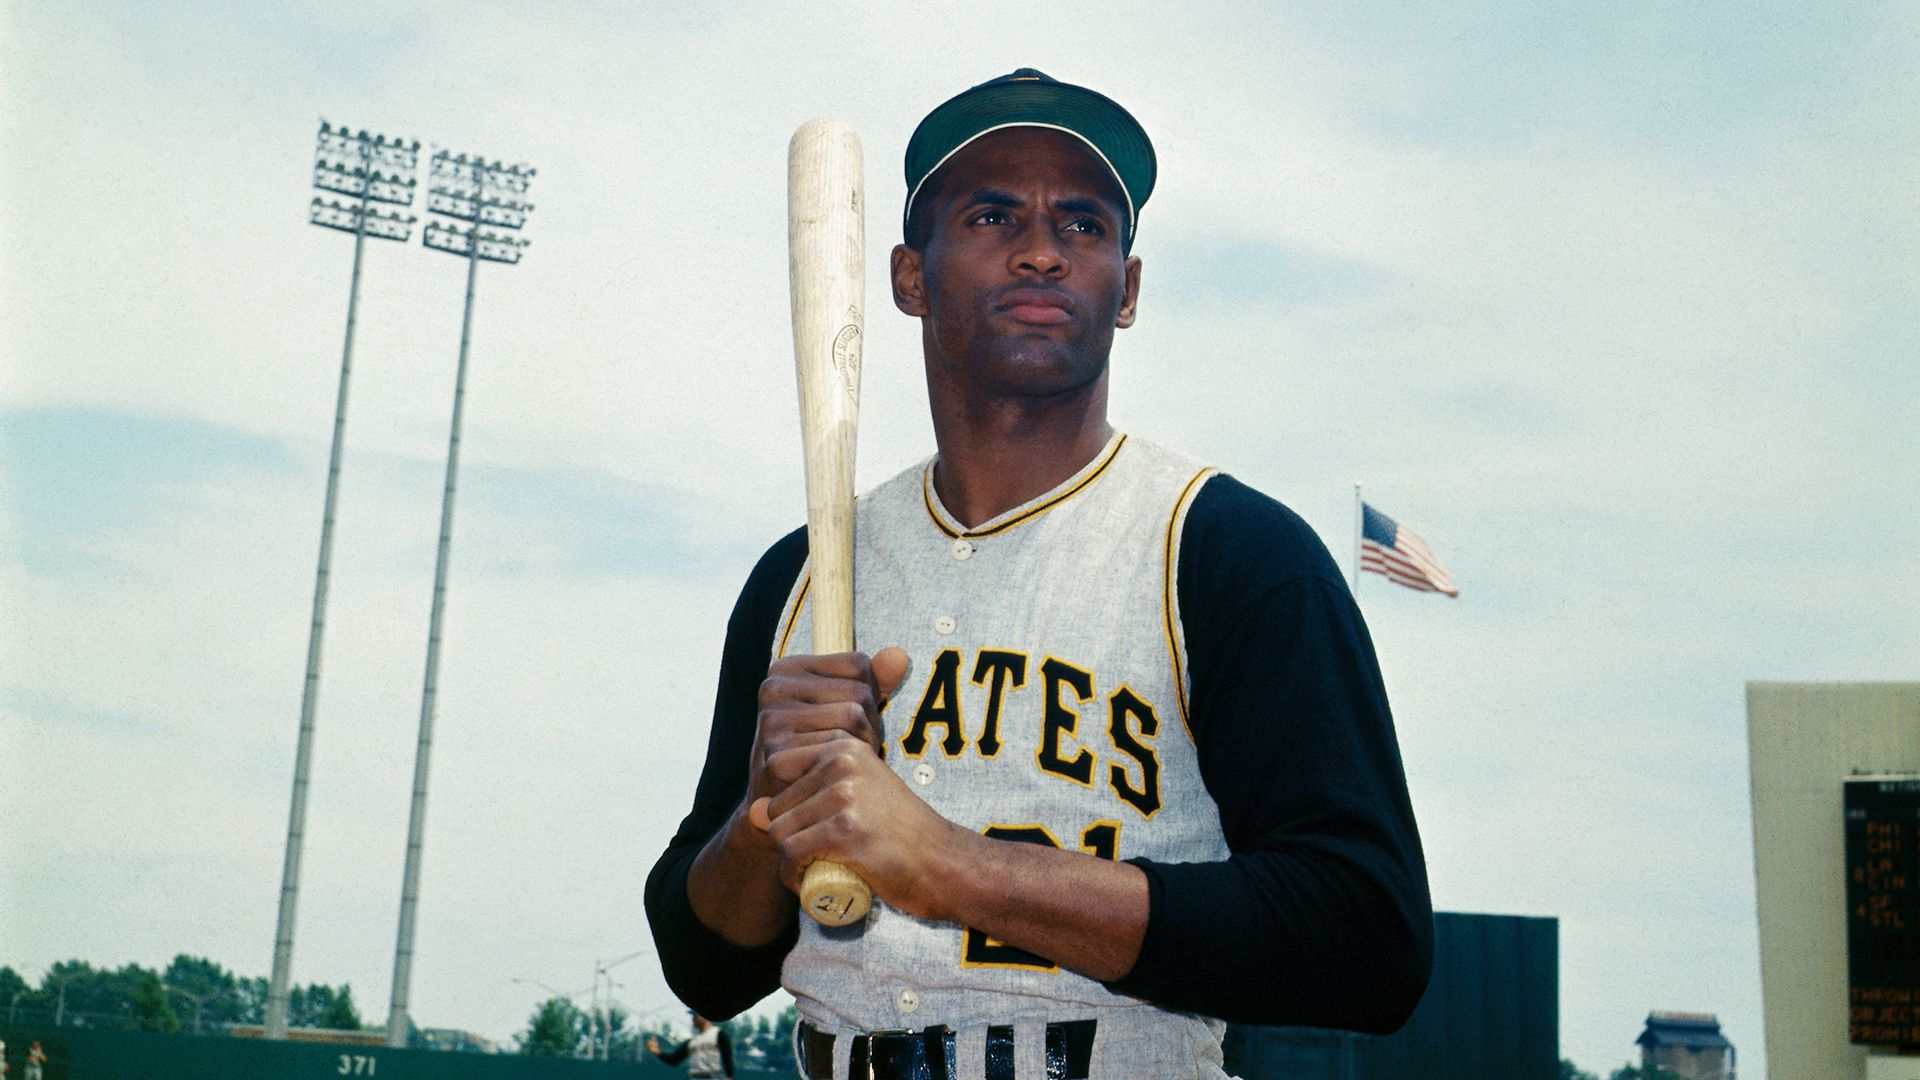 The Yankees who are continuing Roberto Clemente's legacy